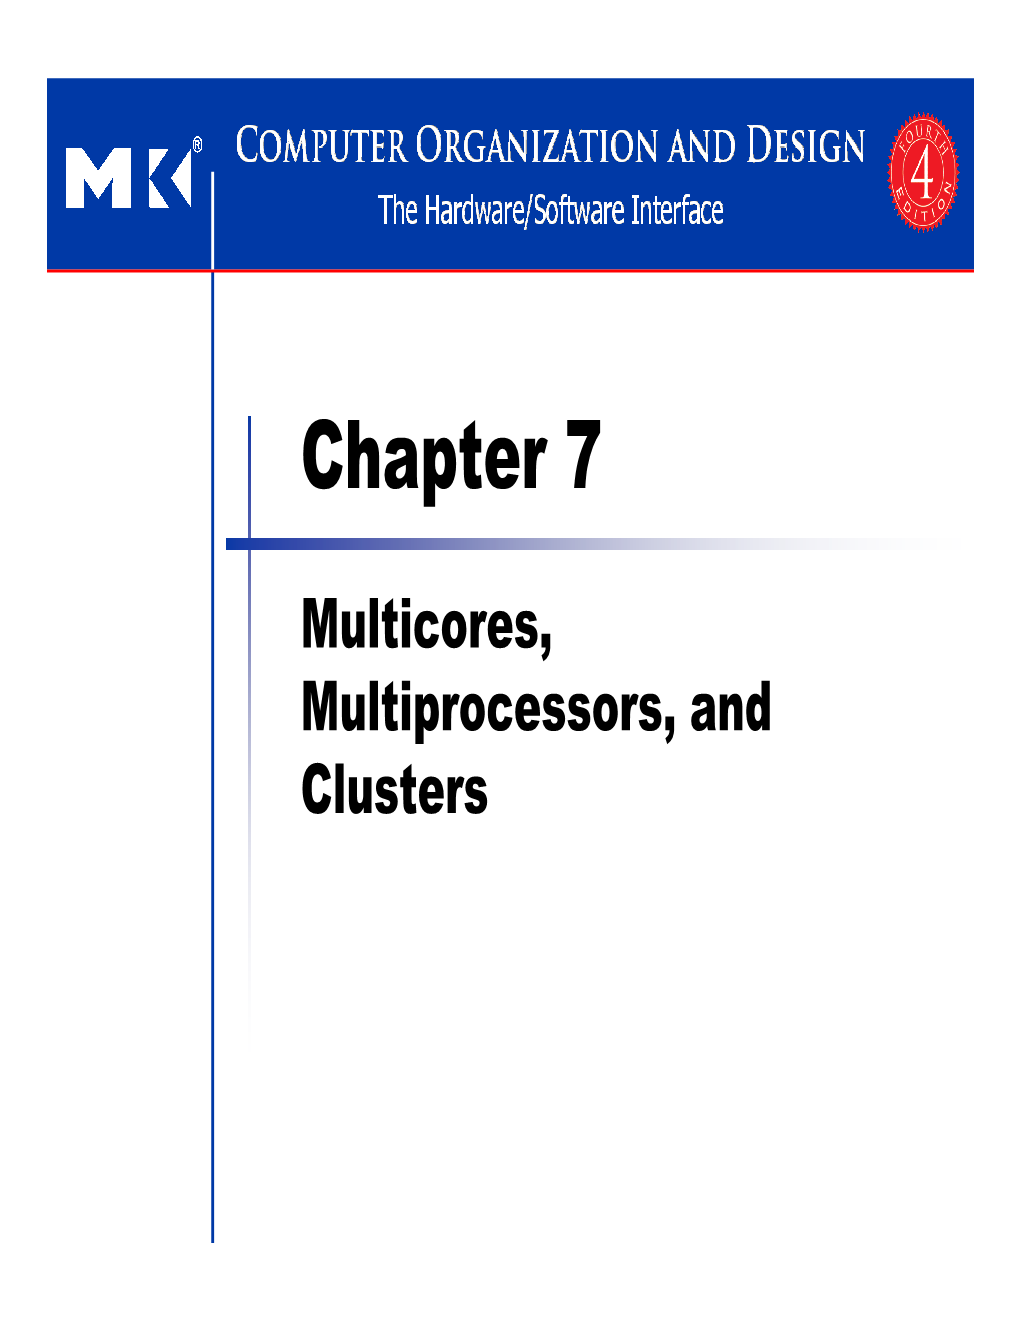 Chapter 7 Multicores, Multiprocessors, and Clusters